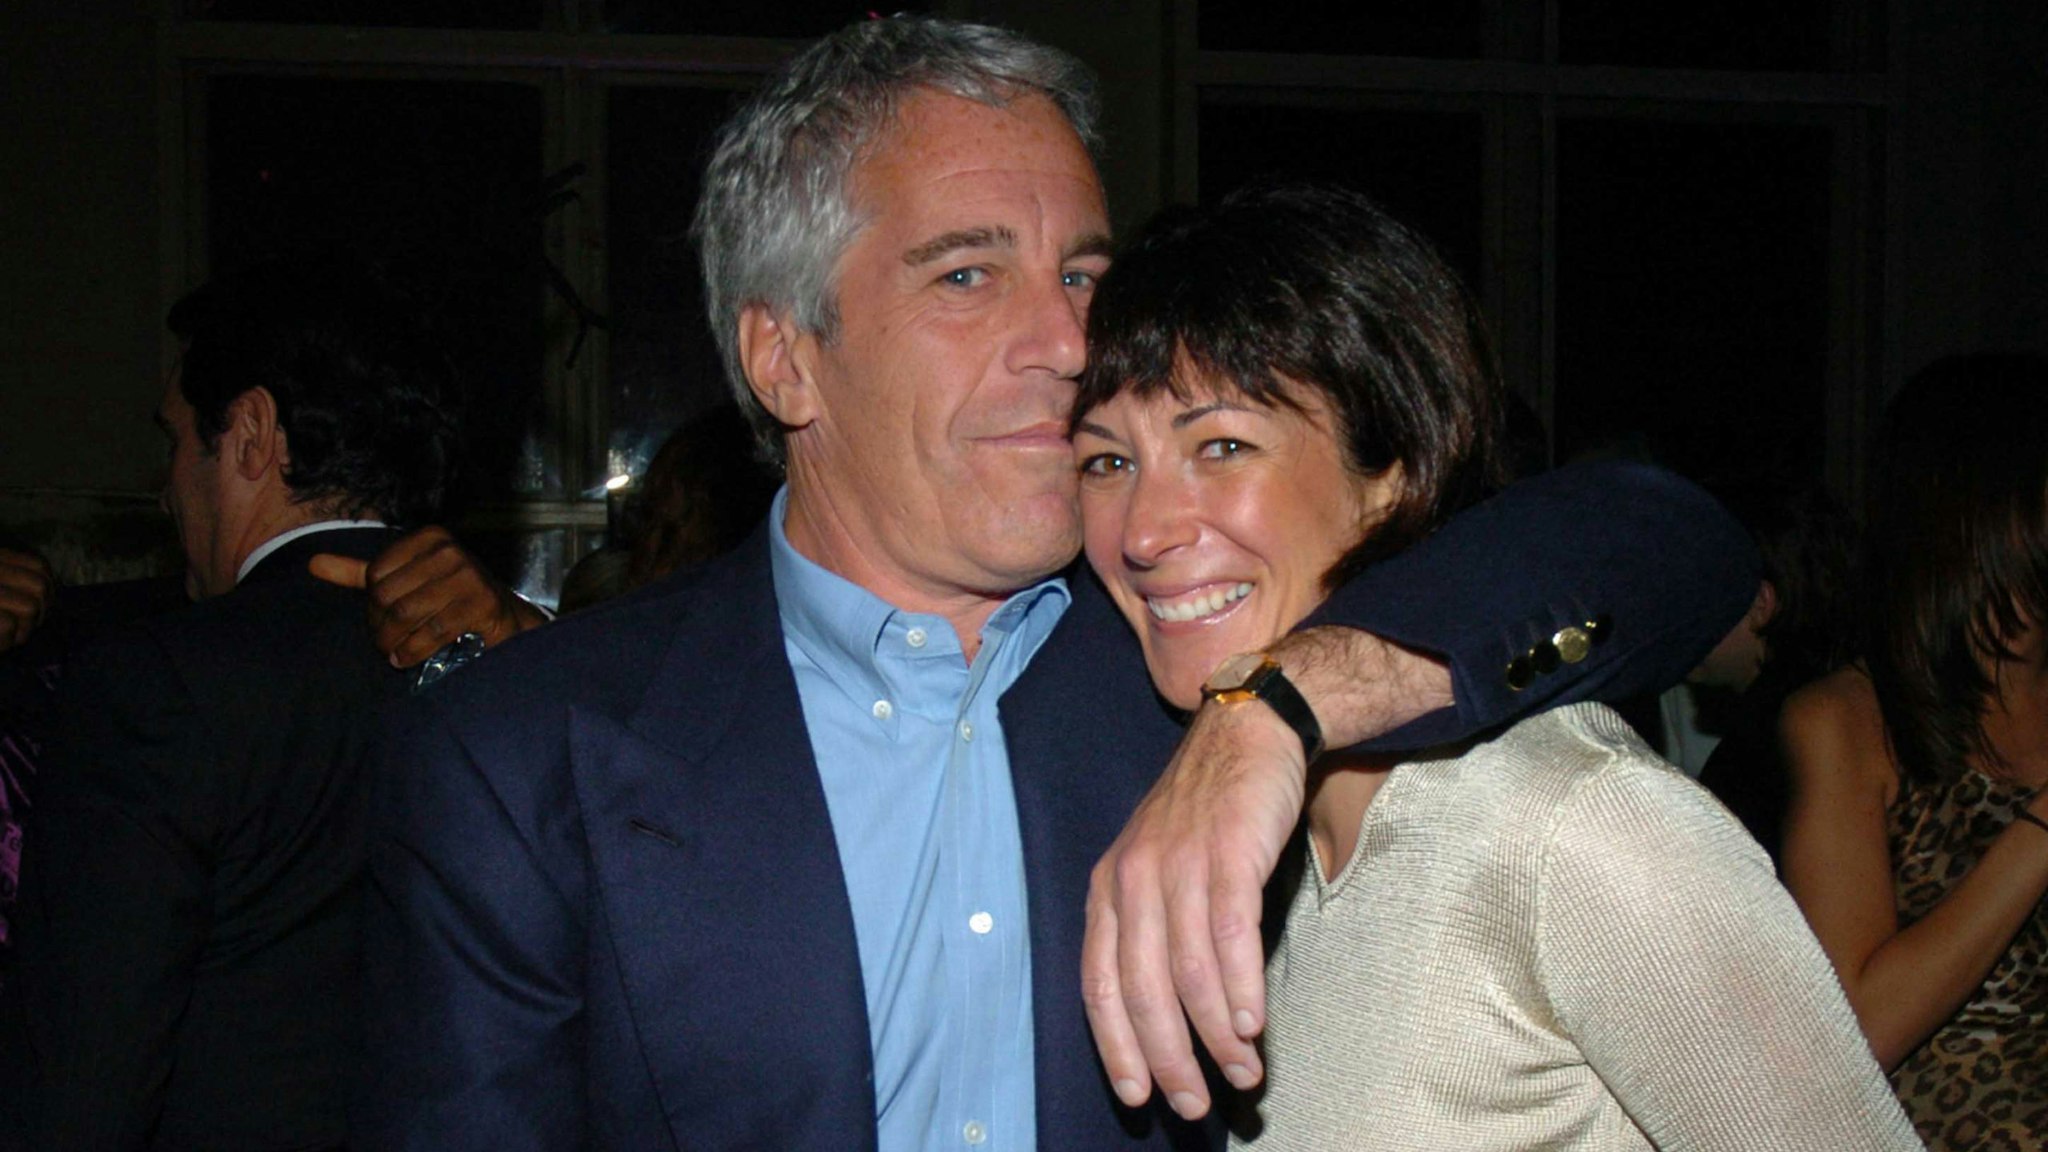 NEW YORK CITY, NY - MARCH 15: Jeffrey Epstein and Ghislaine Maxwell attend de Grisogono Sponsors The 2005 Wall Street Concert Series Benefitting Wall Street Rising, with a Performance by Rod Stewart at Cipriani Wall Street on March 15, 2005 in New York City.